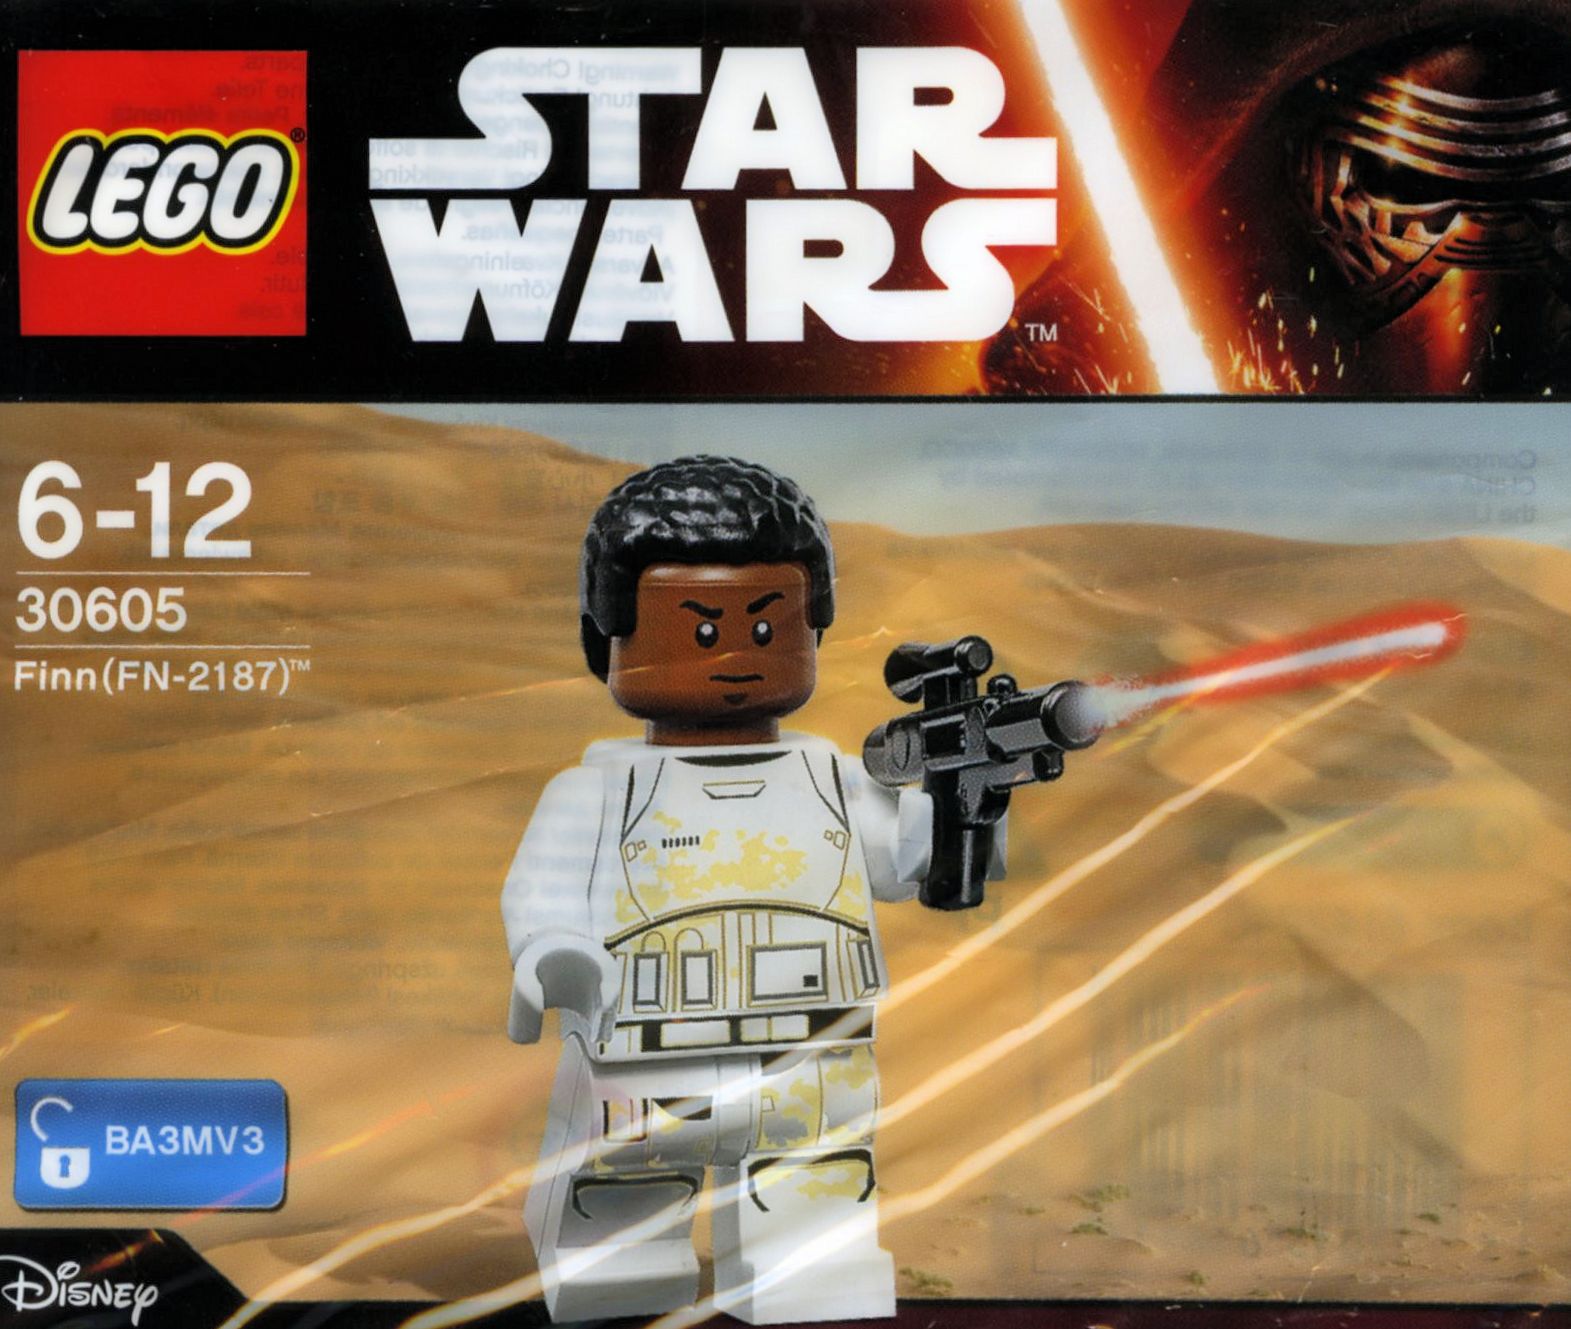 LEGO Star Wars: The Force Awakens - release date, videos